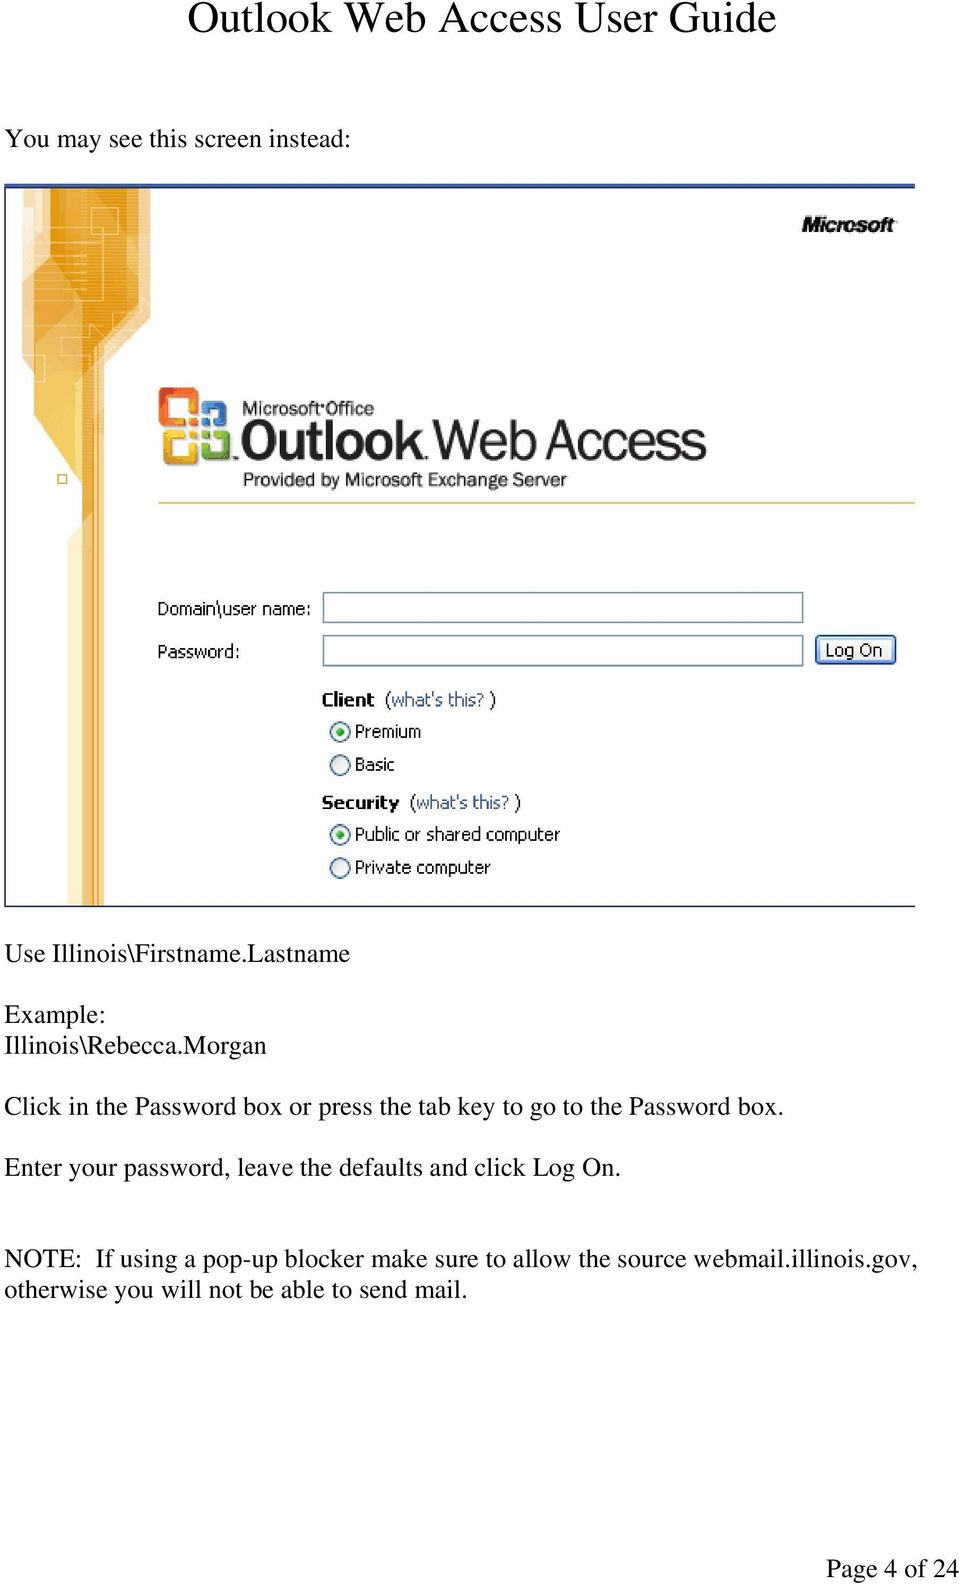 Enter your password, leave the defaults and click Log On.